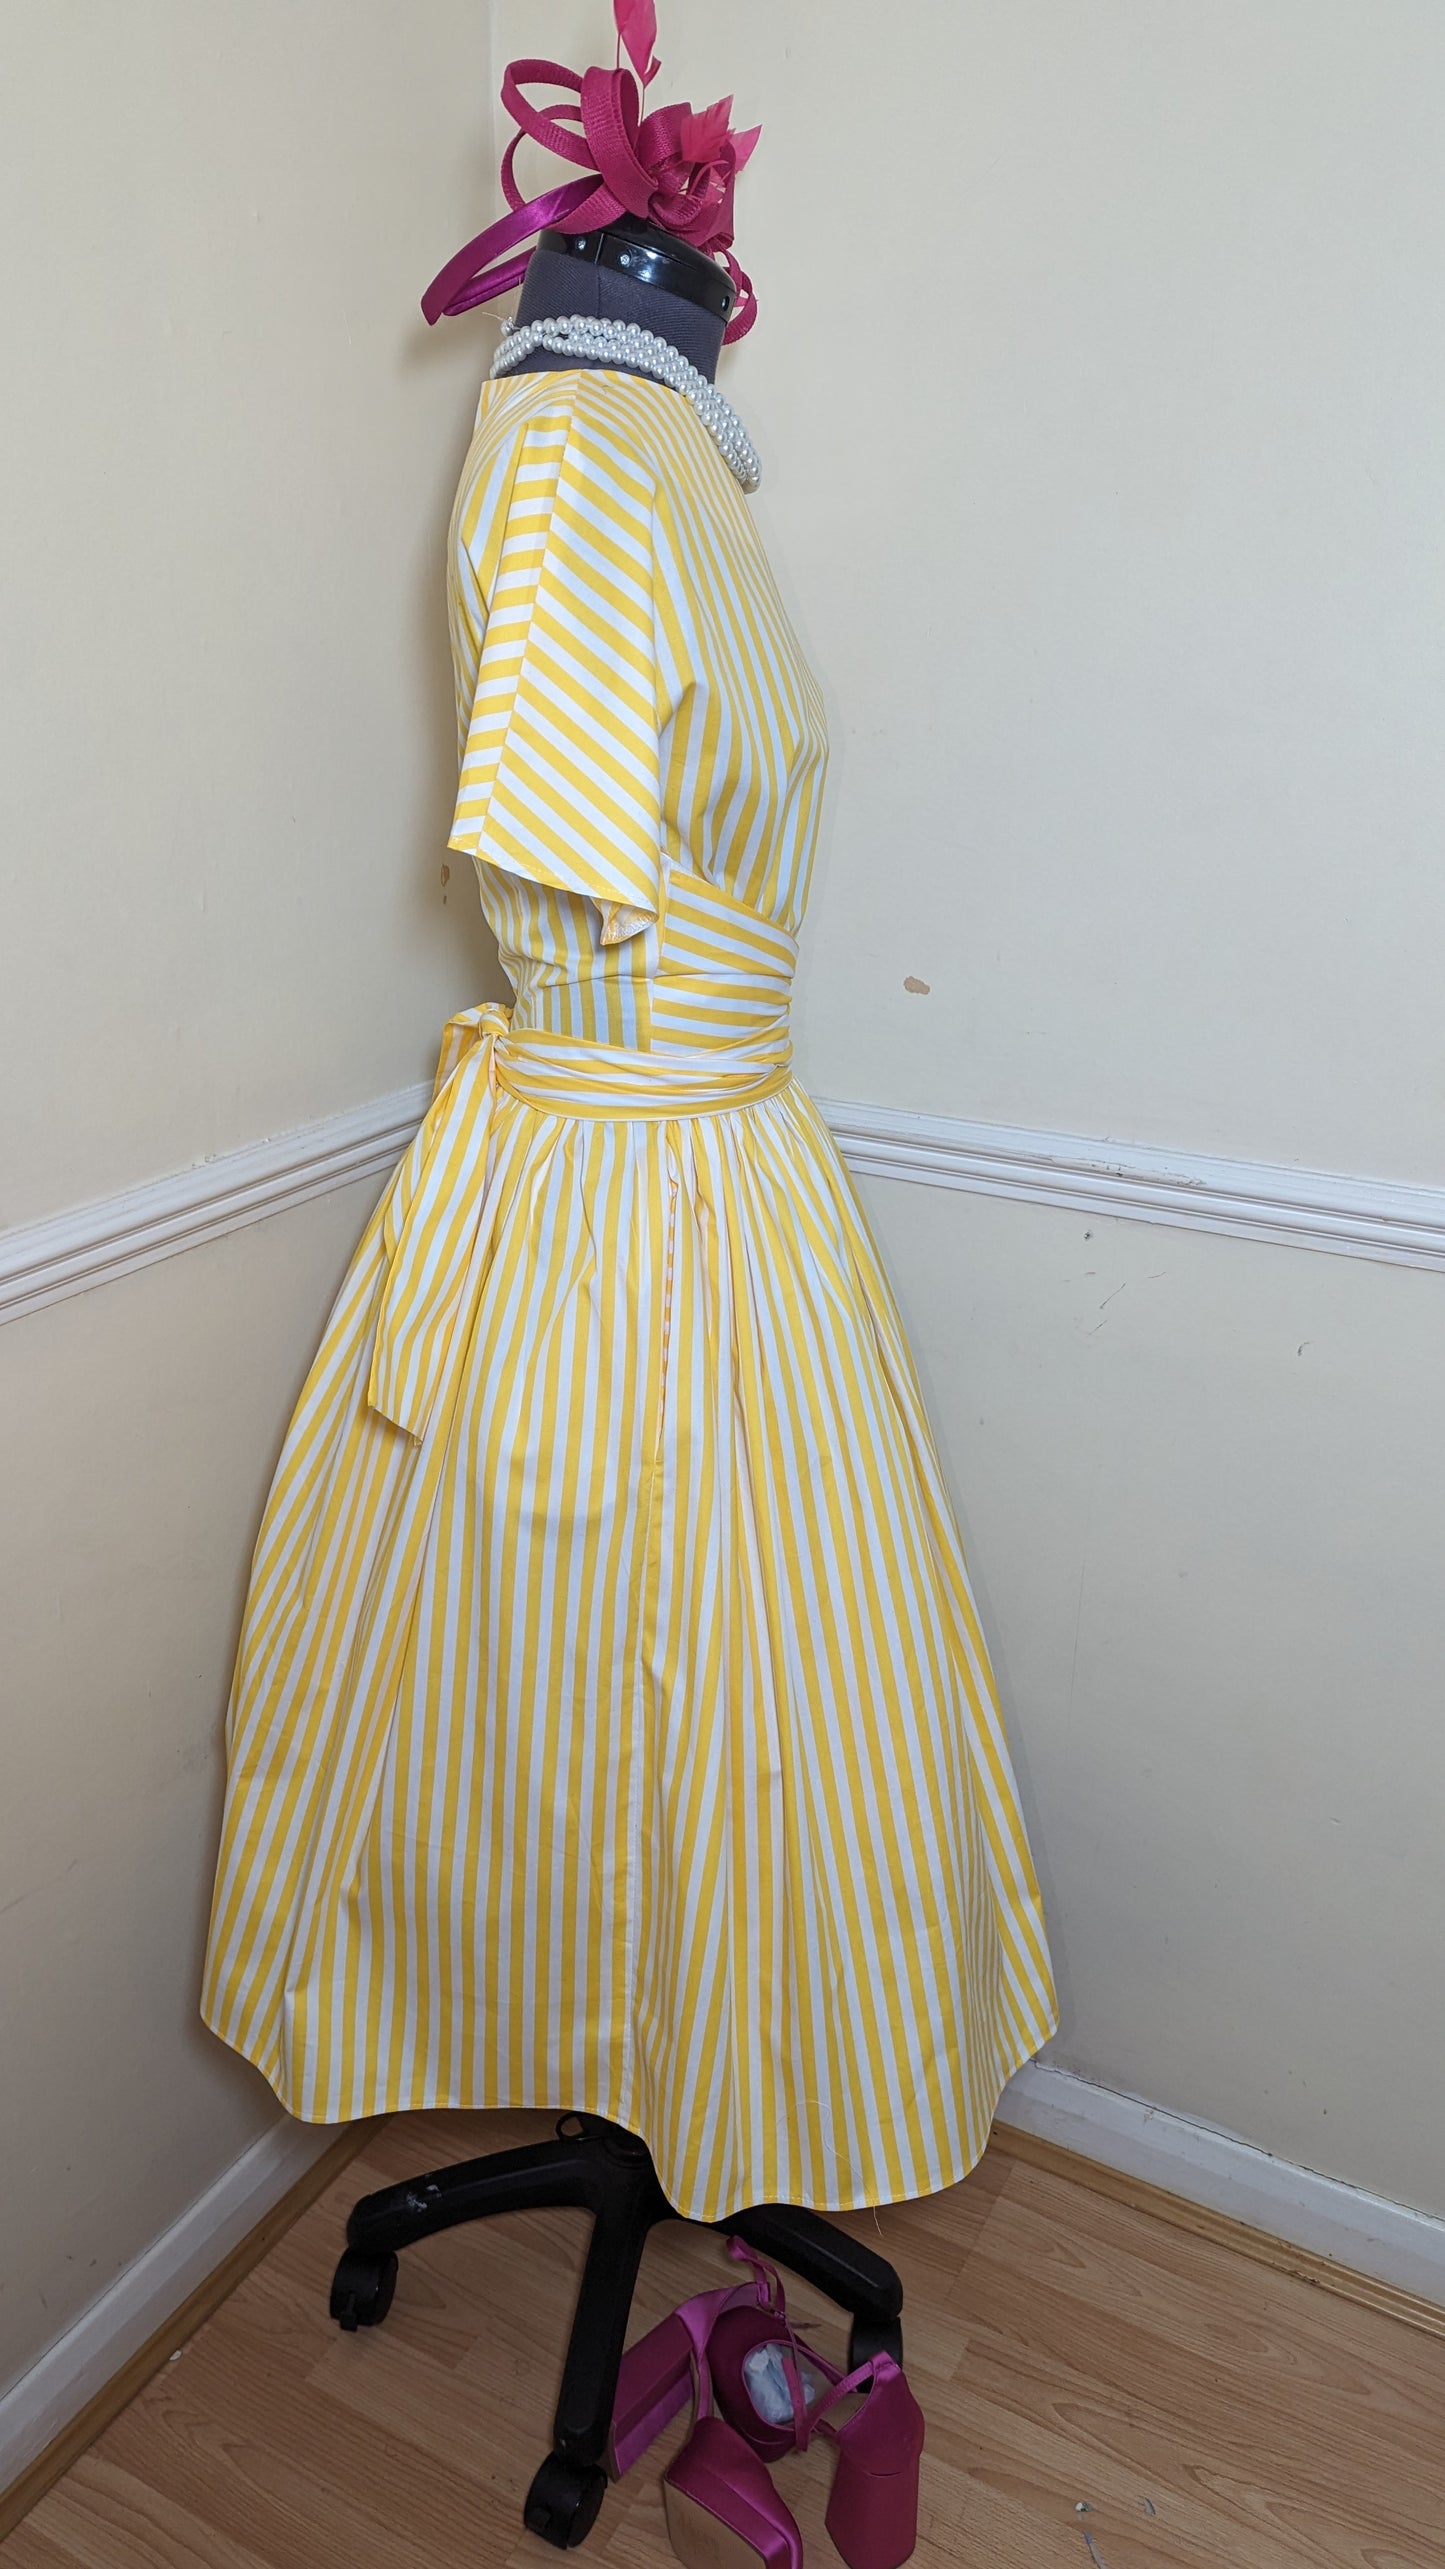 Abigail, 1960s Vintage Dress in Yellow